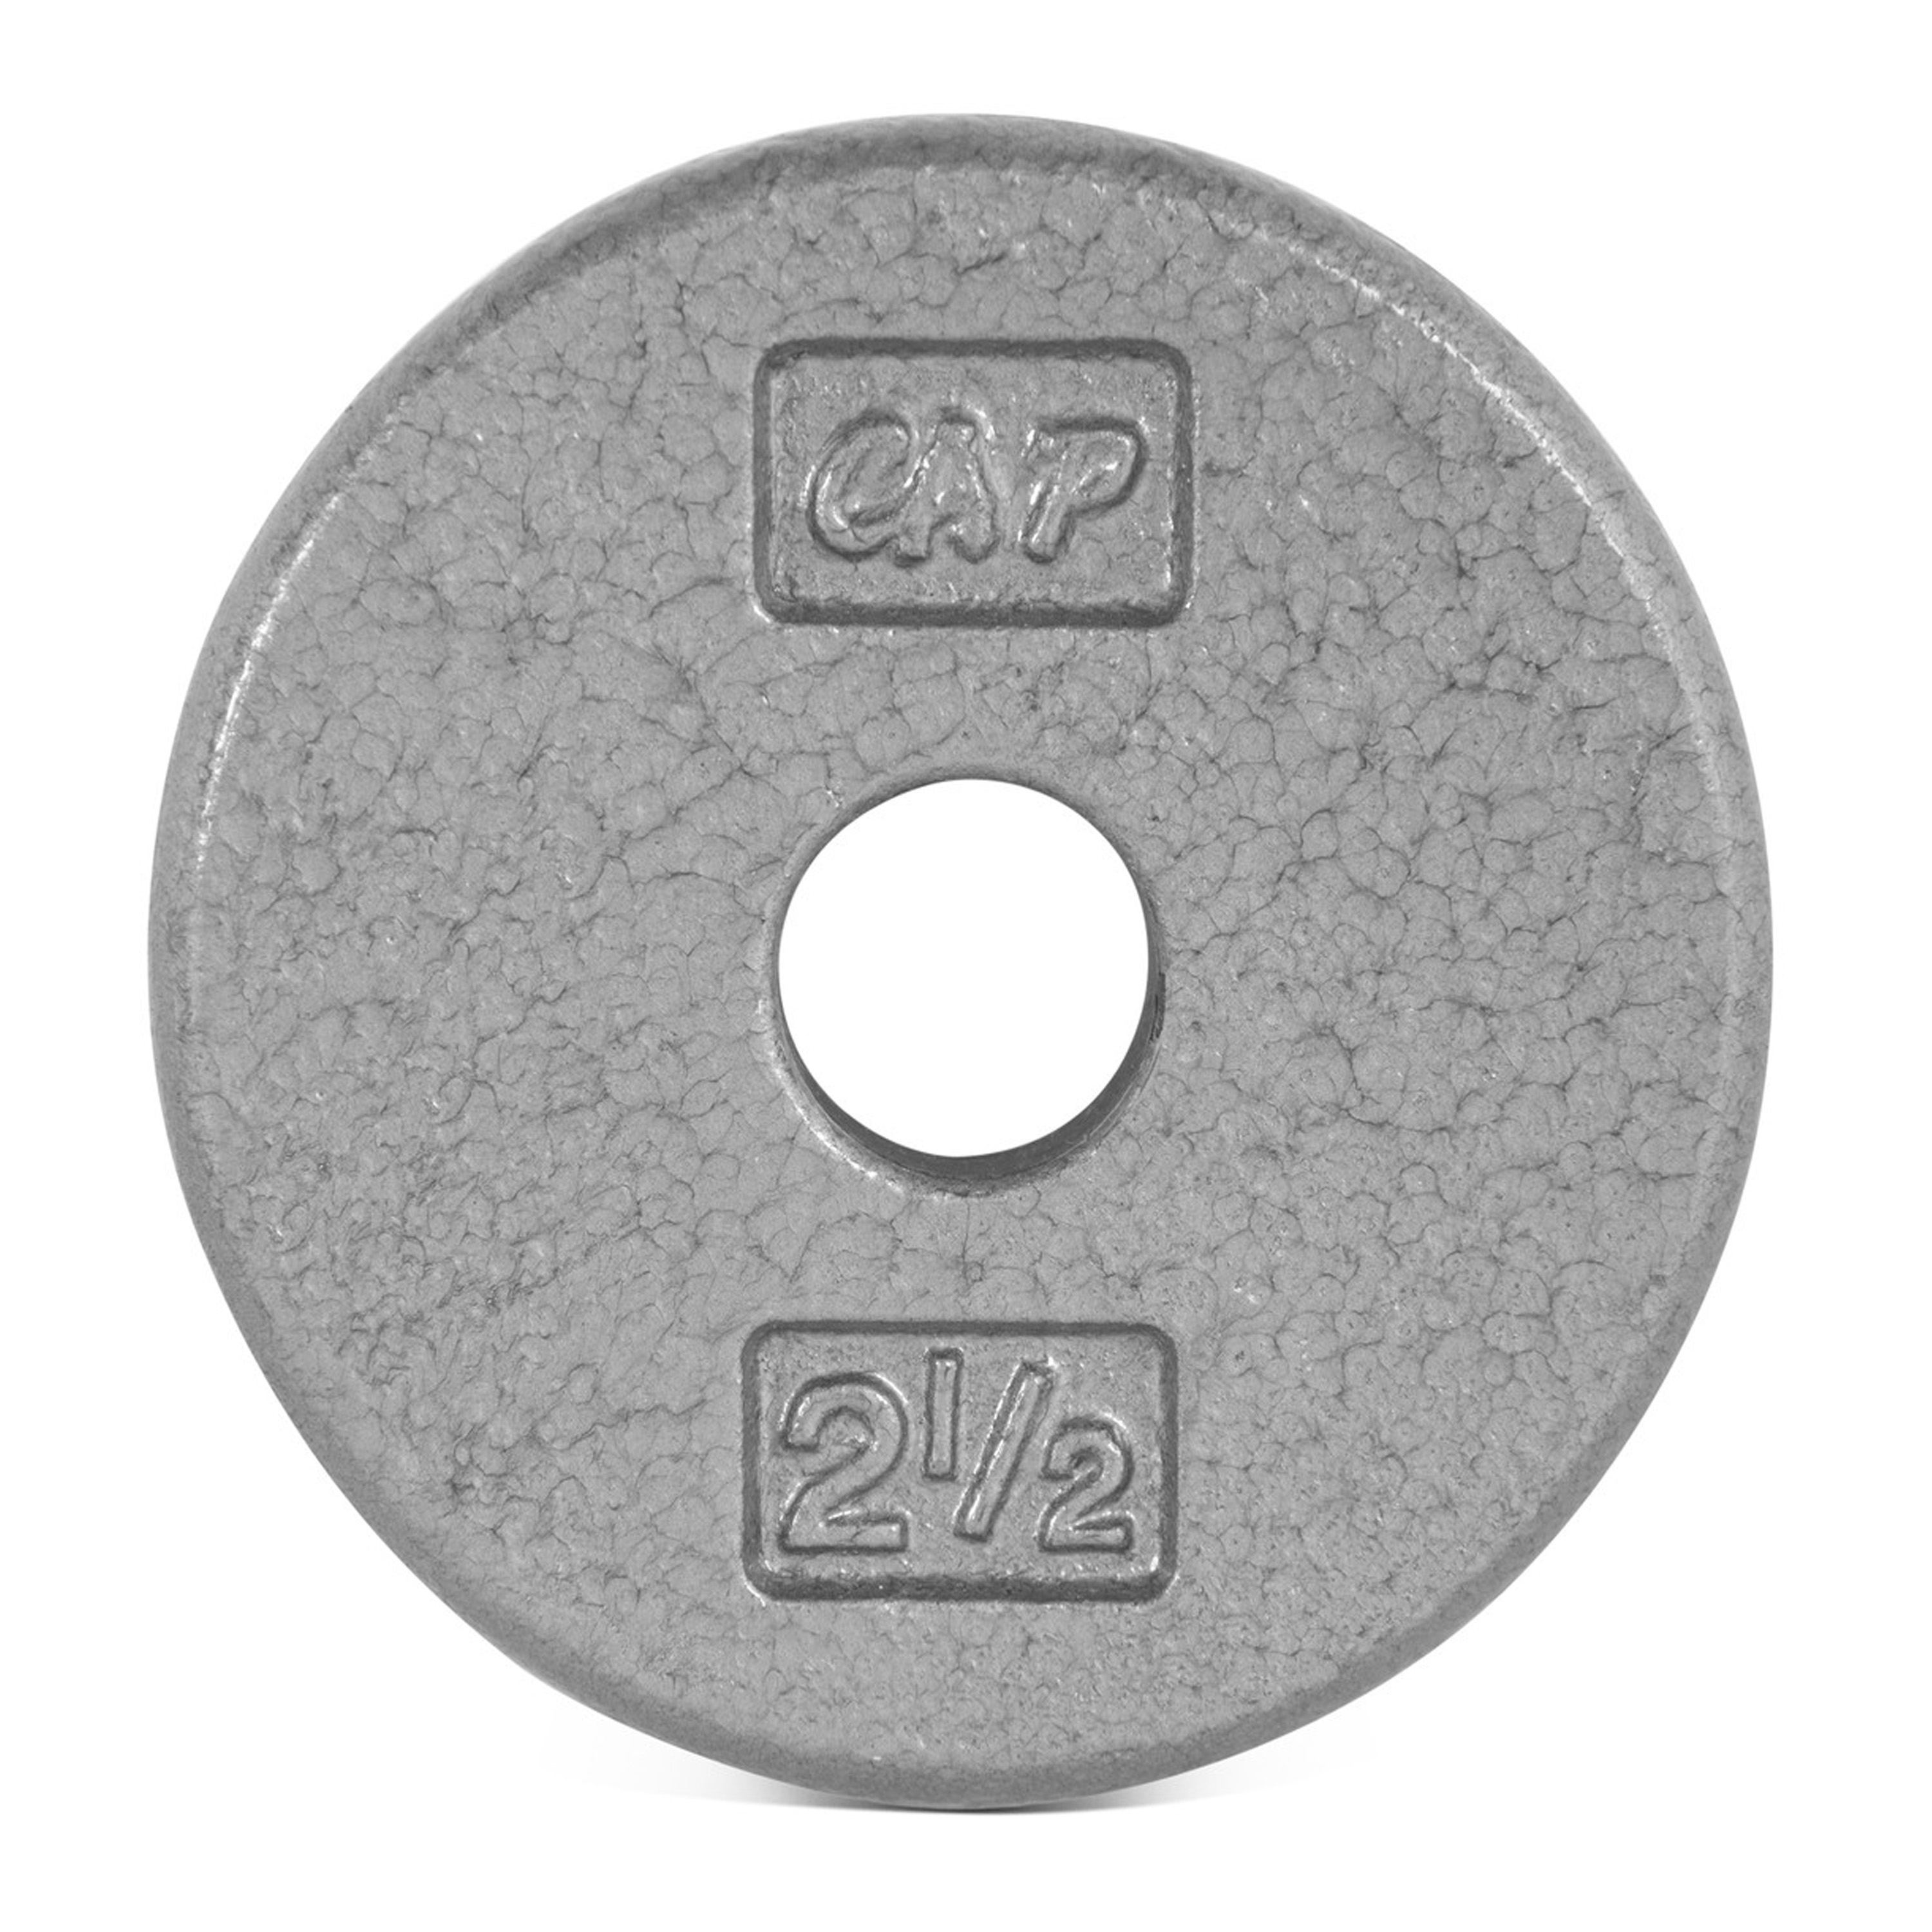 CAP Barbell Standard Cast Iron Weight Plate, 1.25-50 Lbs. Single - image 1 of 2